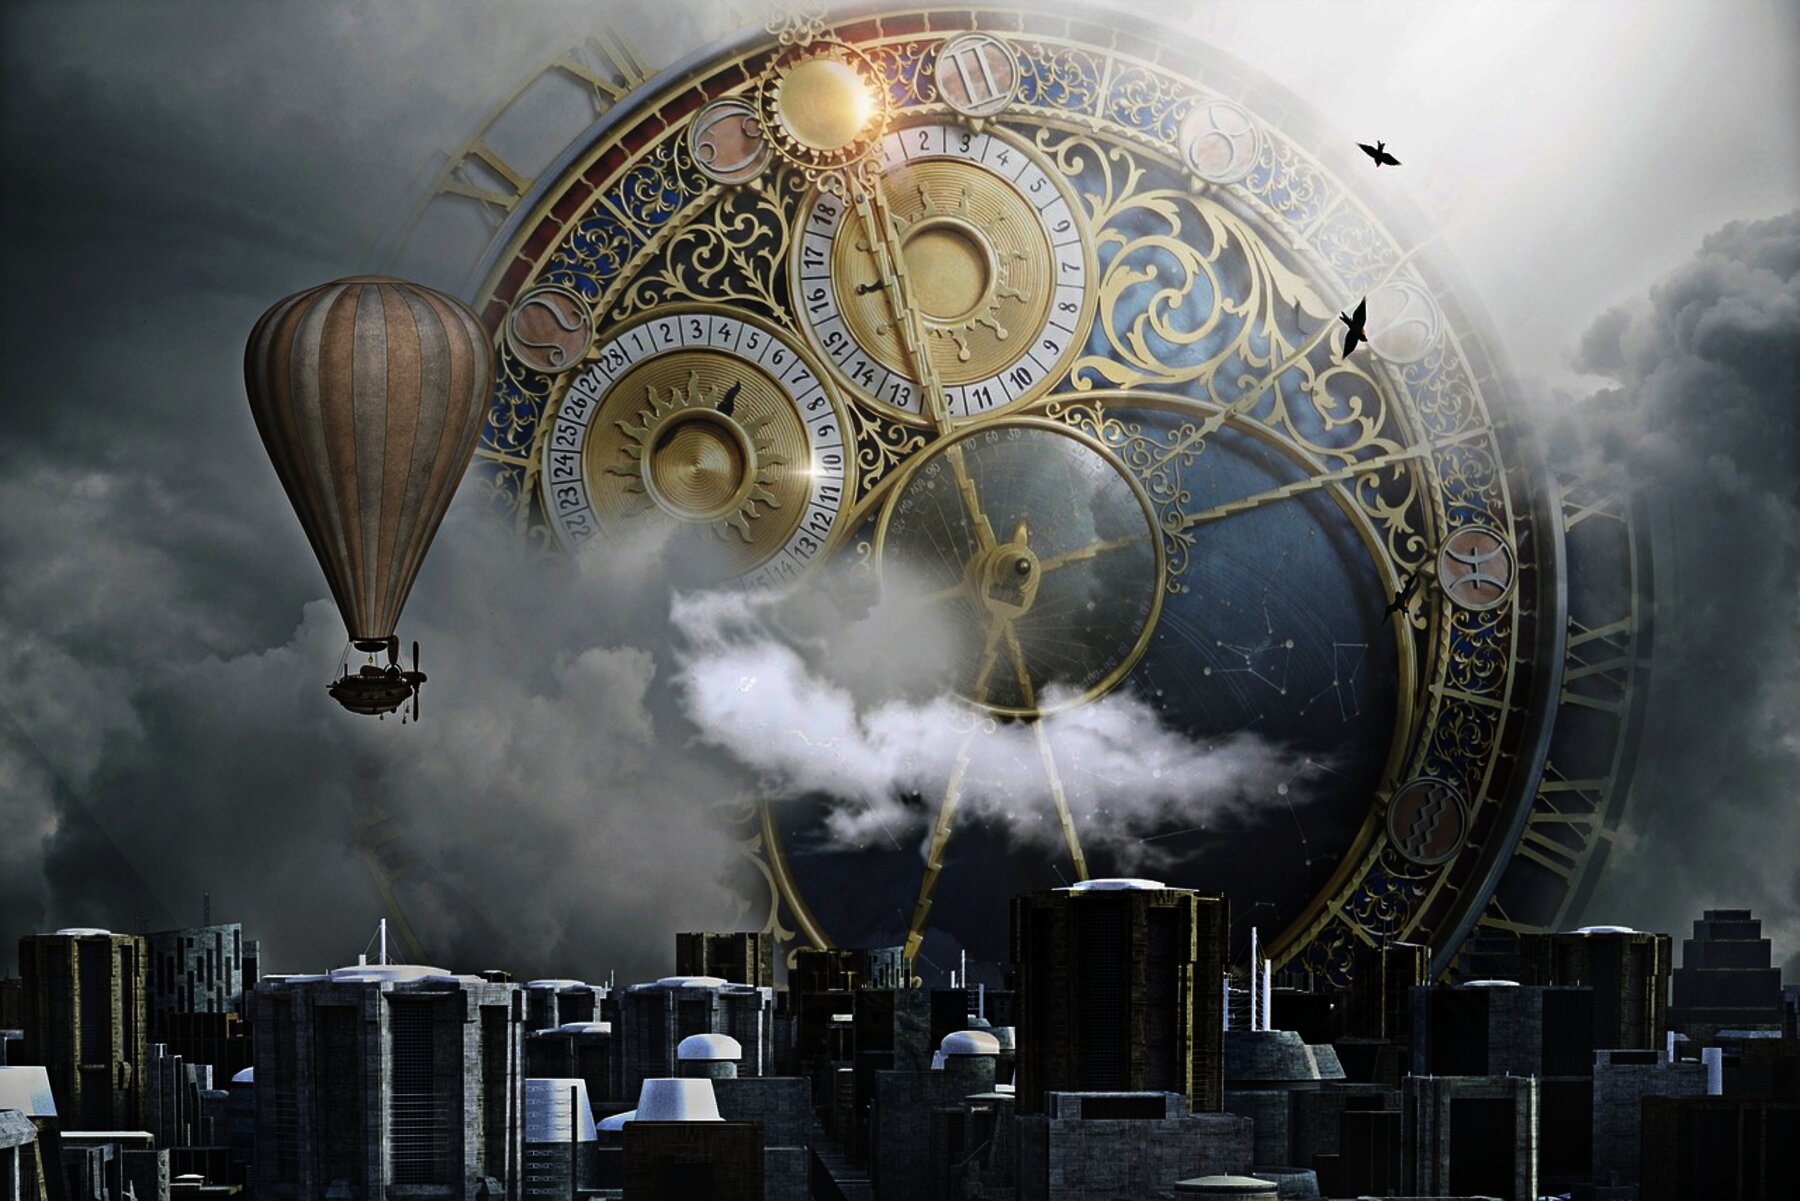 A cityscape featuring a large, complex clock in the background and a hot air balloon flying above.